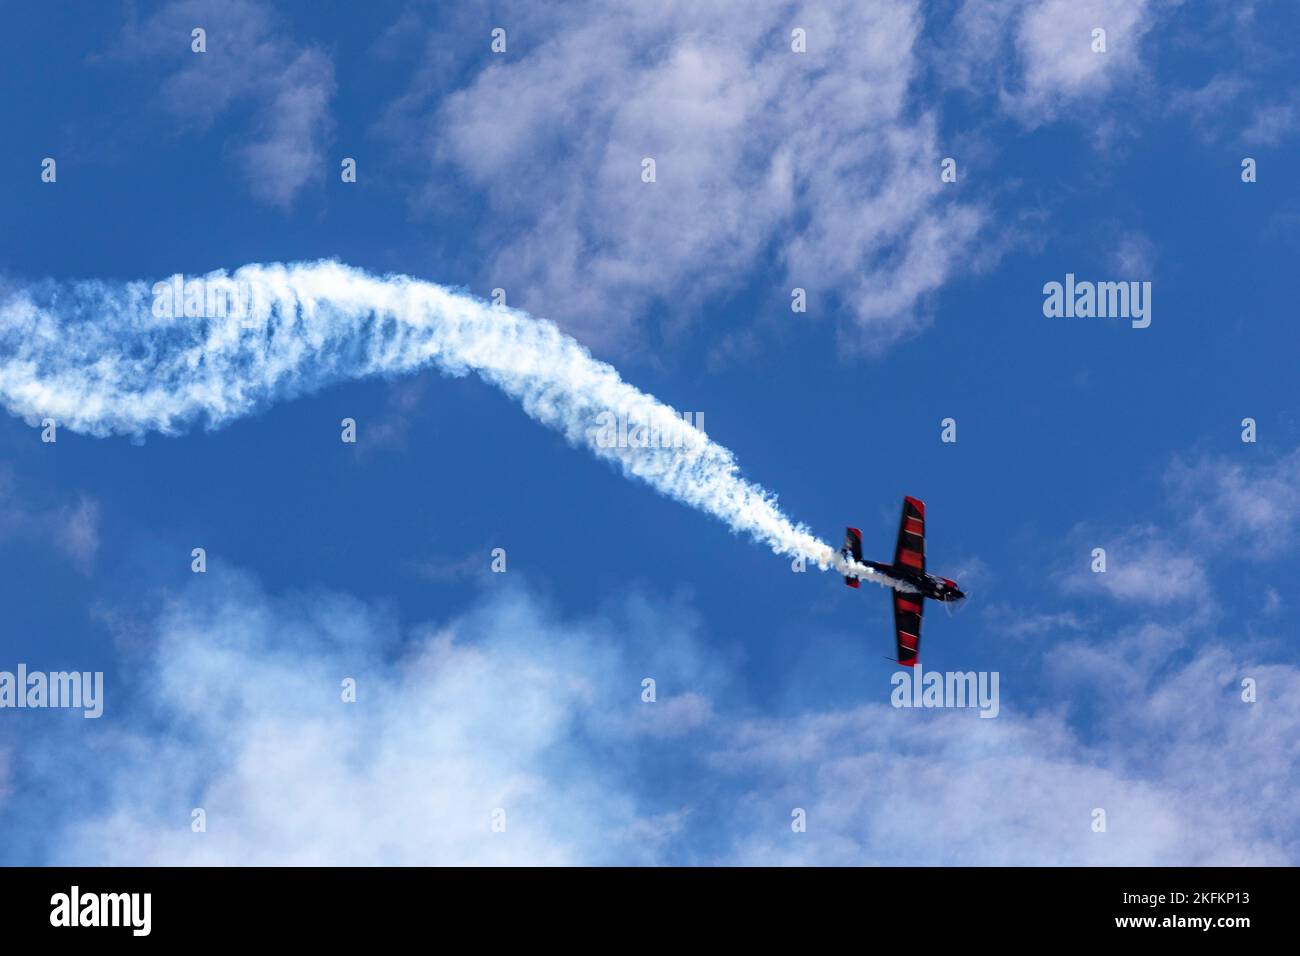 Rob Holland, piloting his MXS-RH, performs aerobatics during the 2022 Marine Corps Air Station Miramar Air Show at MCAS Miramar, San Diego, California, Sept. 24, 2022. Holland has been performing at air shows for over 18 years. The theme for the 2022 MCAS Miramar Air Show, “Marines Fight, Evolve and Win,” reflects the Marine Corps’ ongoing modernization efforts to prepare for future conflicts. Stock Photo